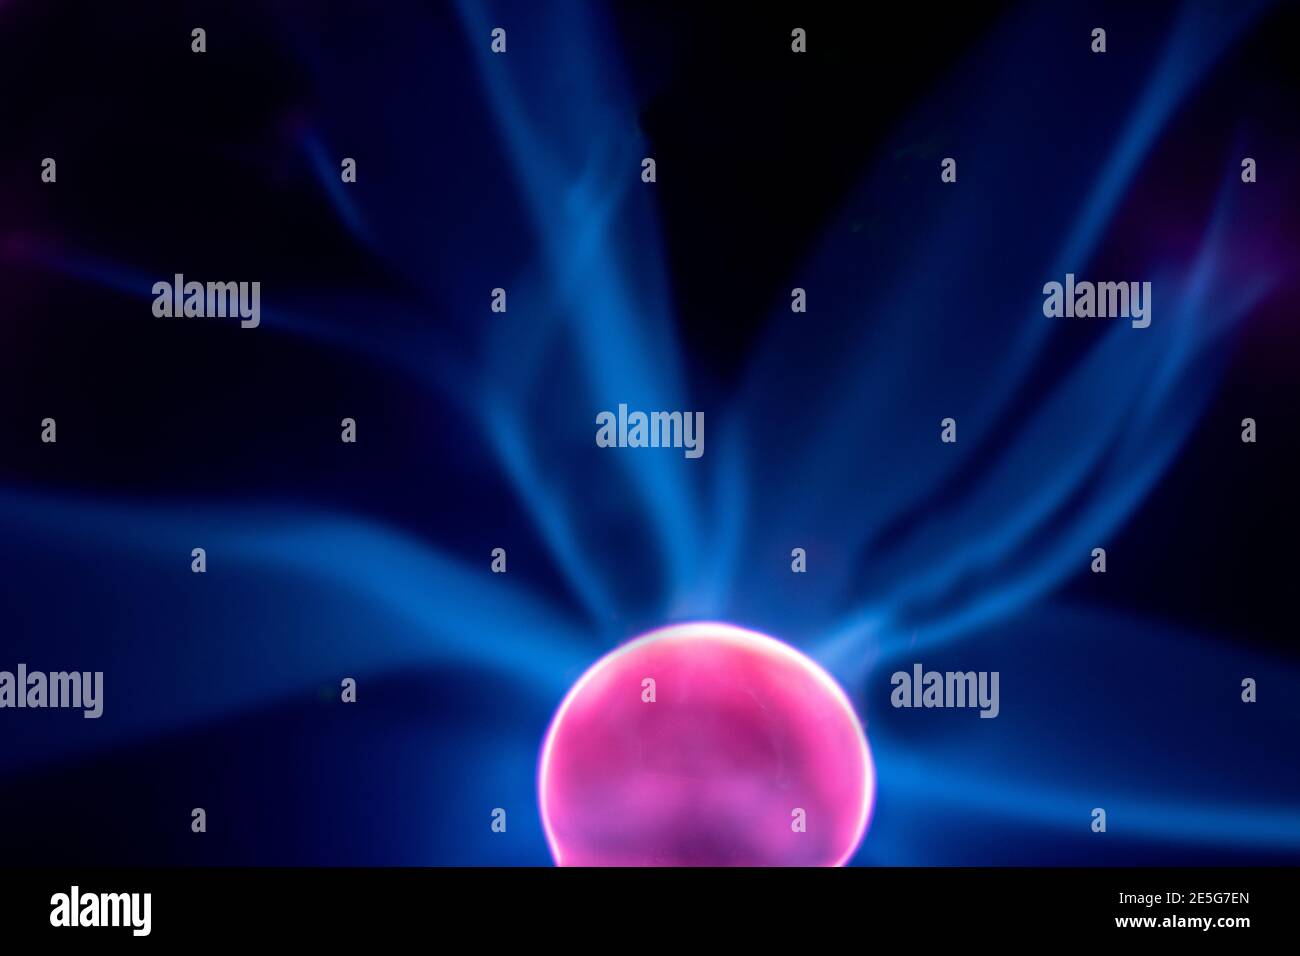 Plasma electric ball lightning lamp. Fascinating space video, close-up of electrical discharges with blue flames on a dark background. Stock Photo